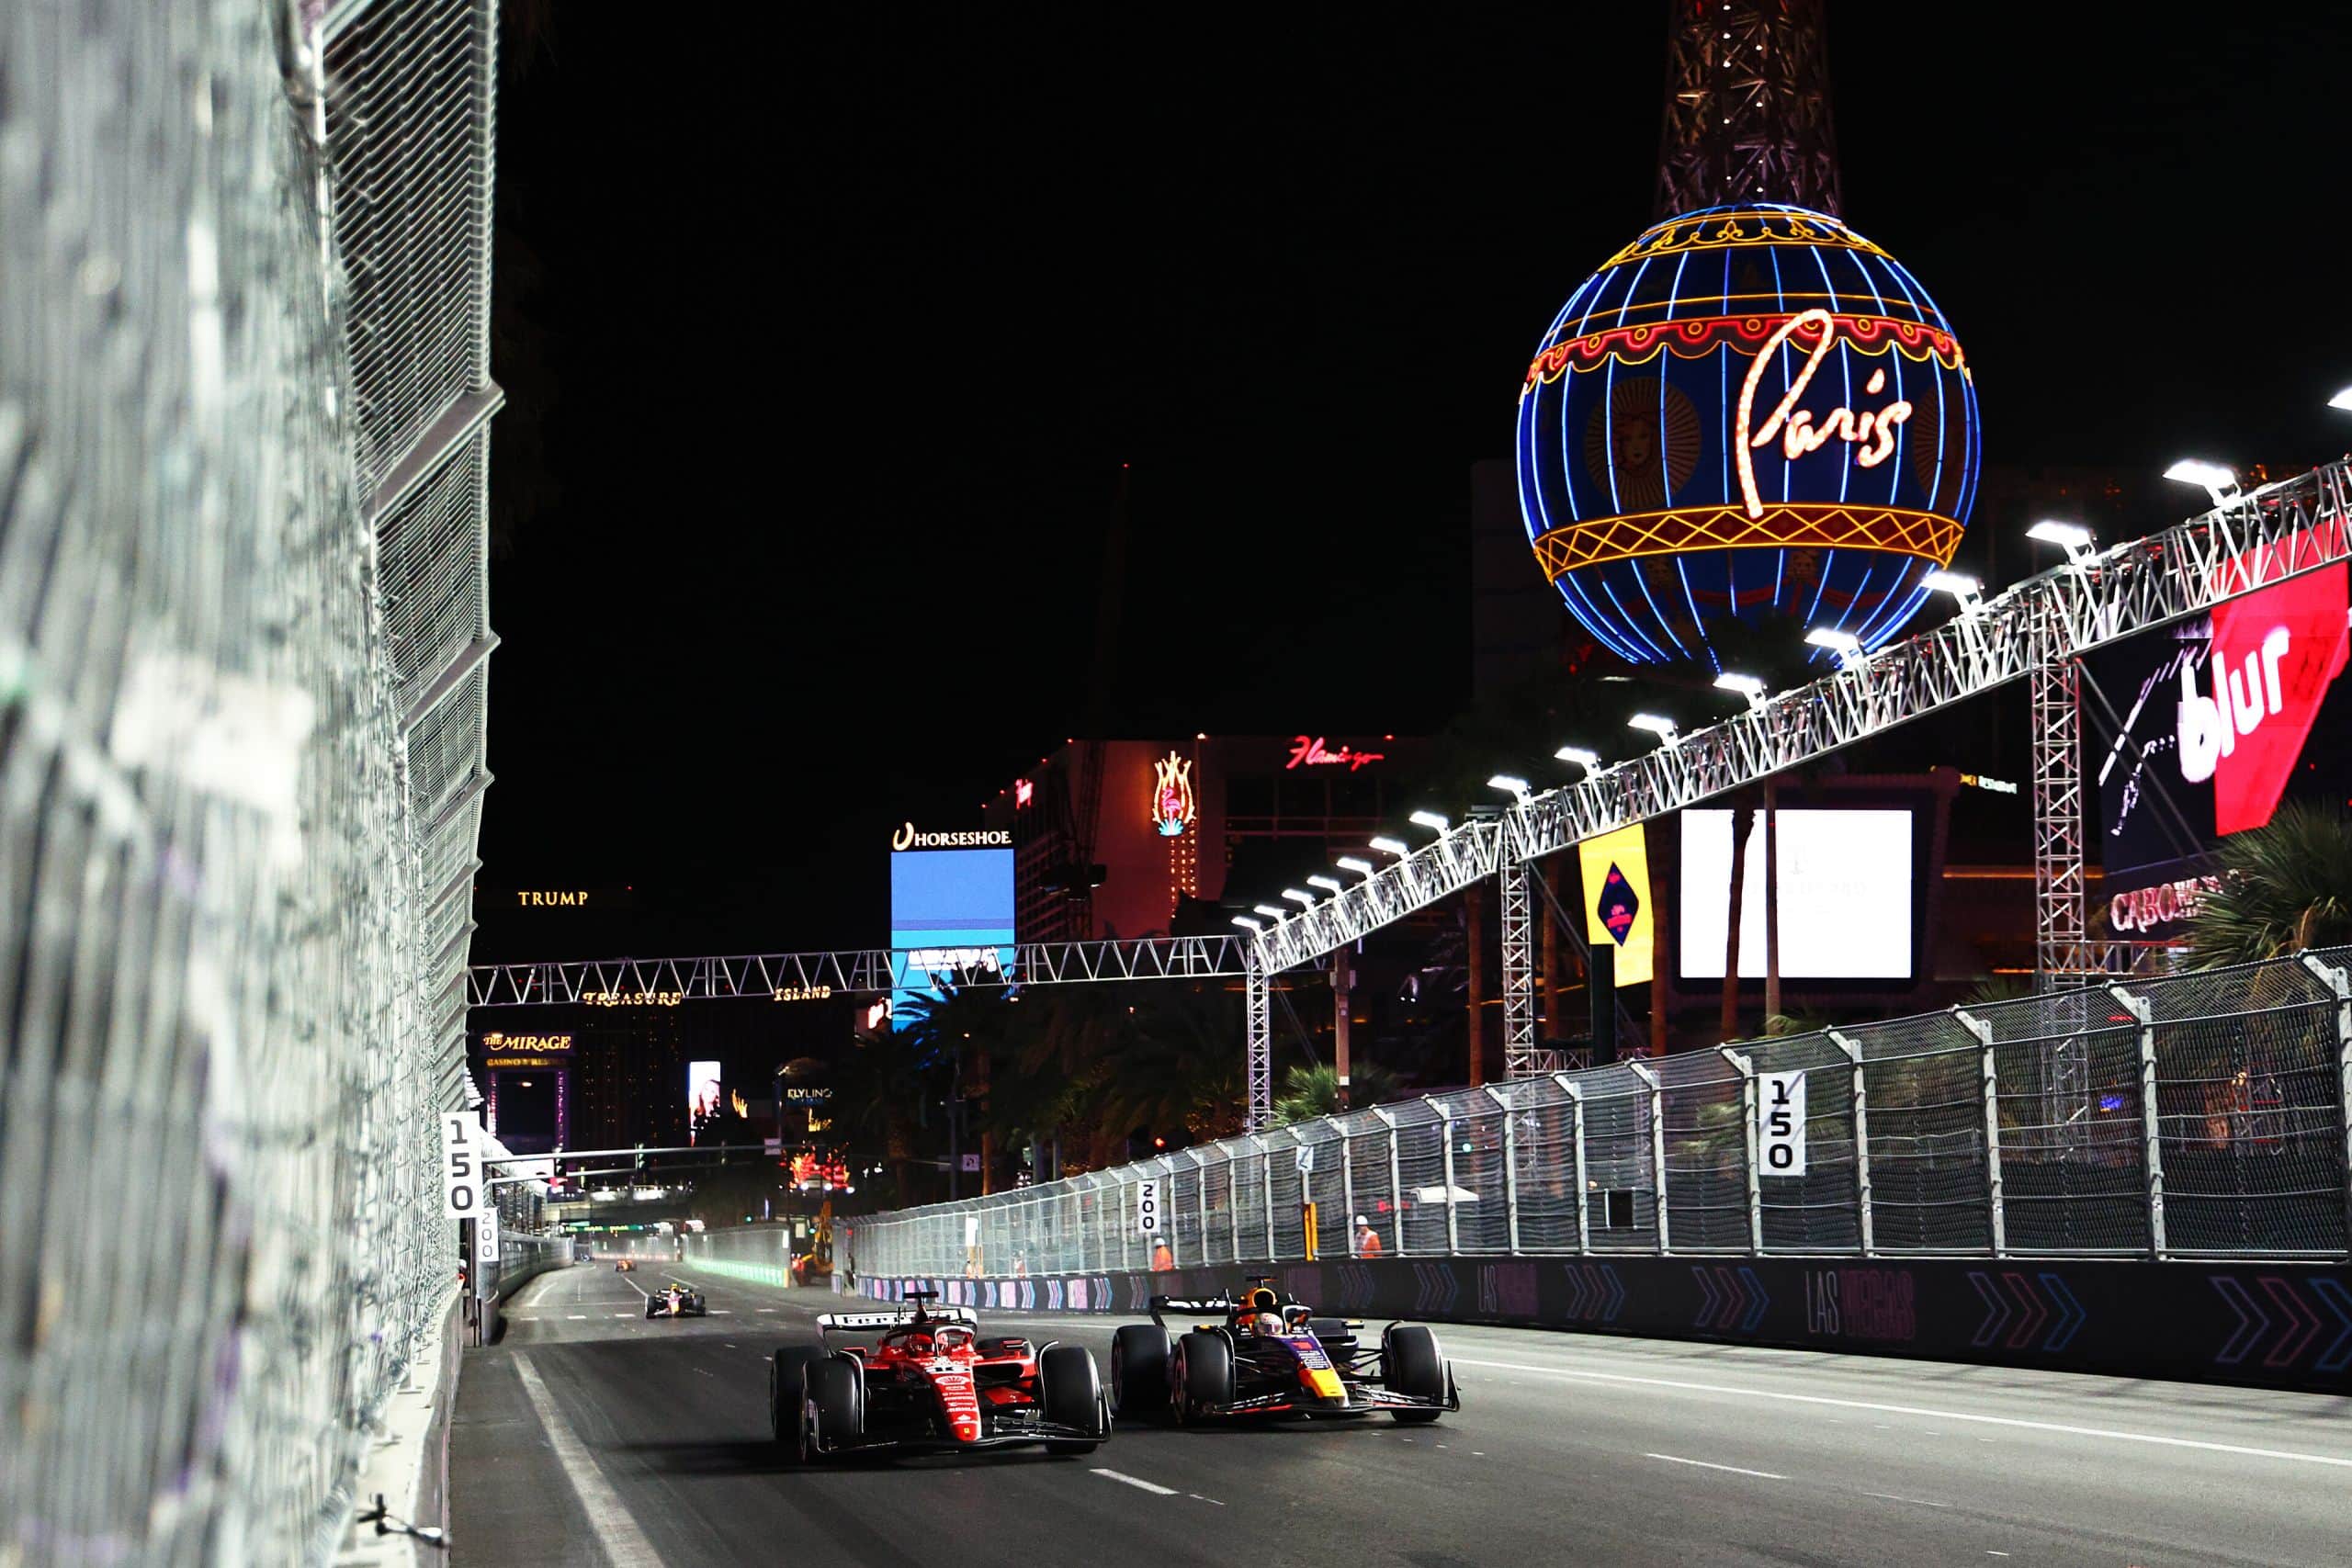 Where Is The Best Place To Watch F1 In Las Vegas